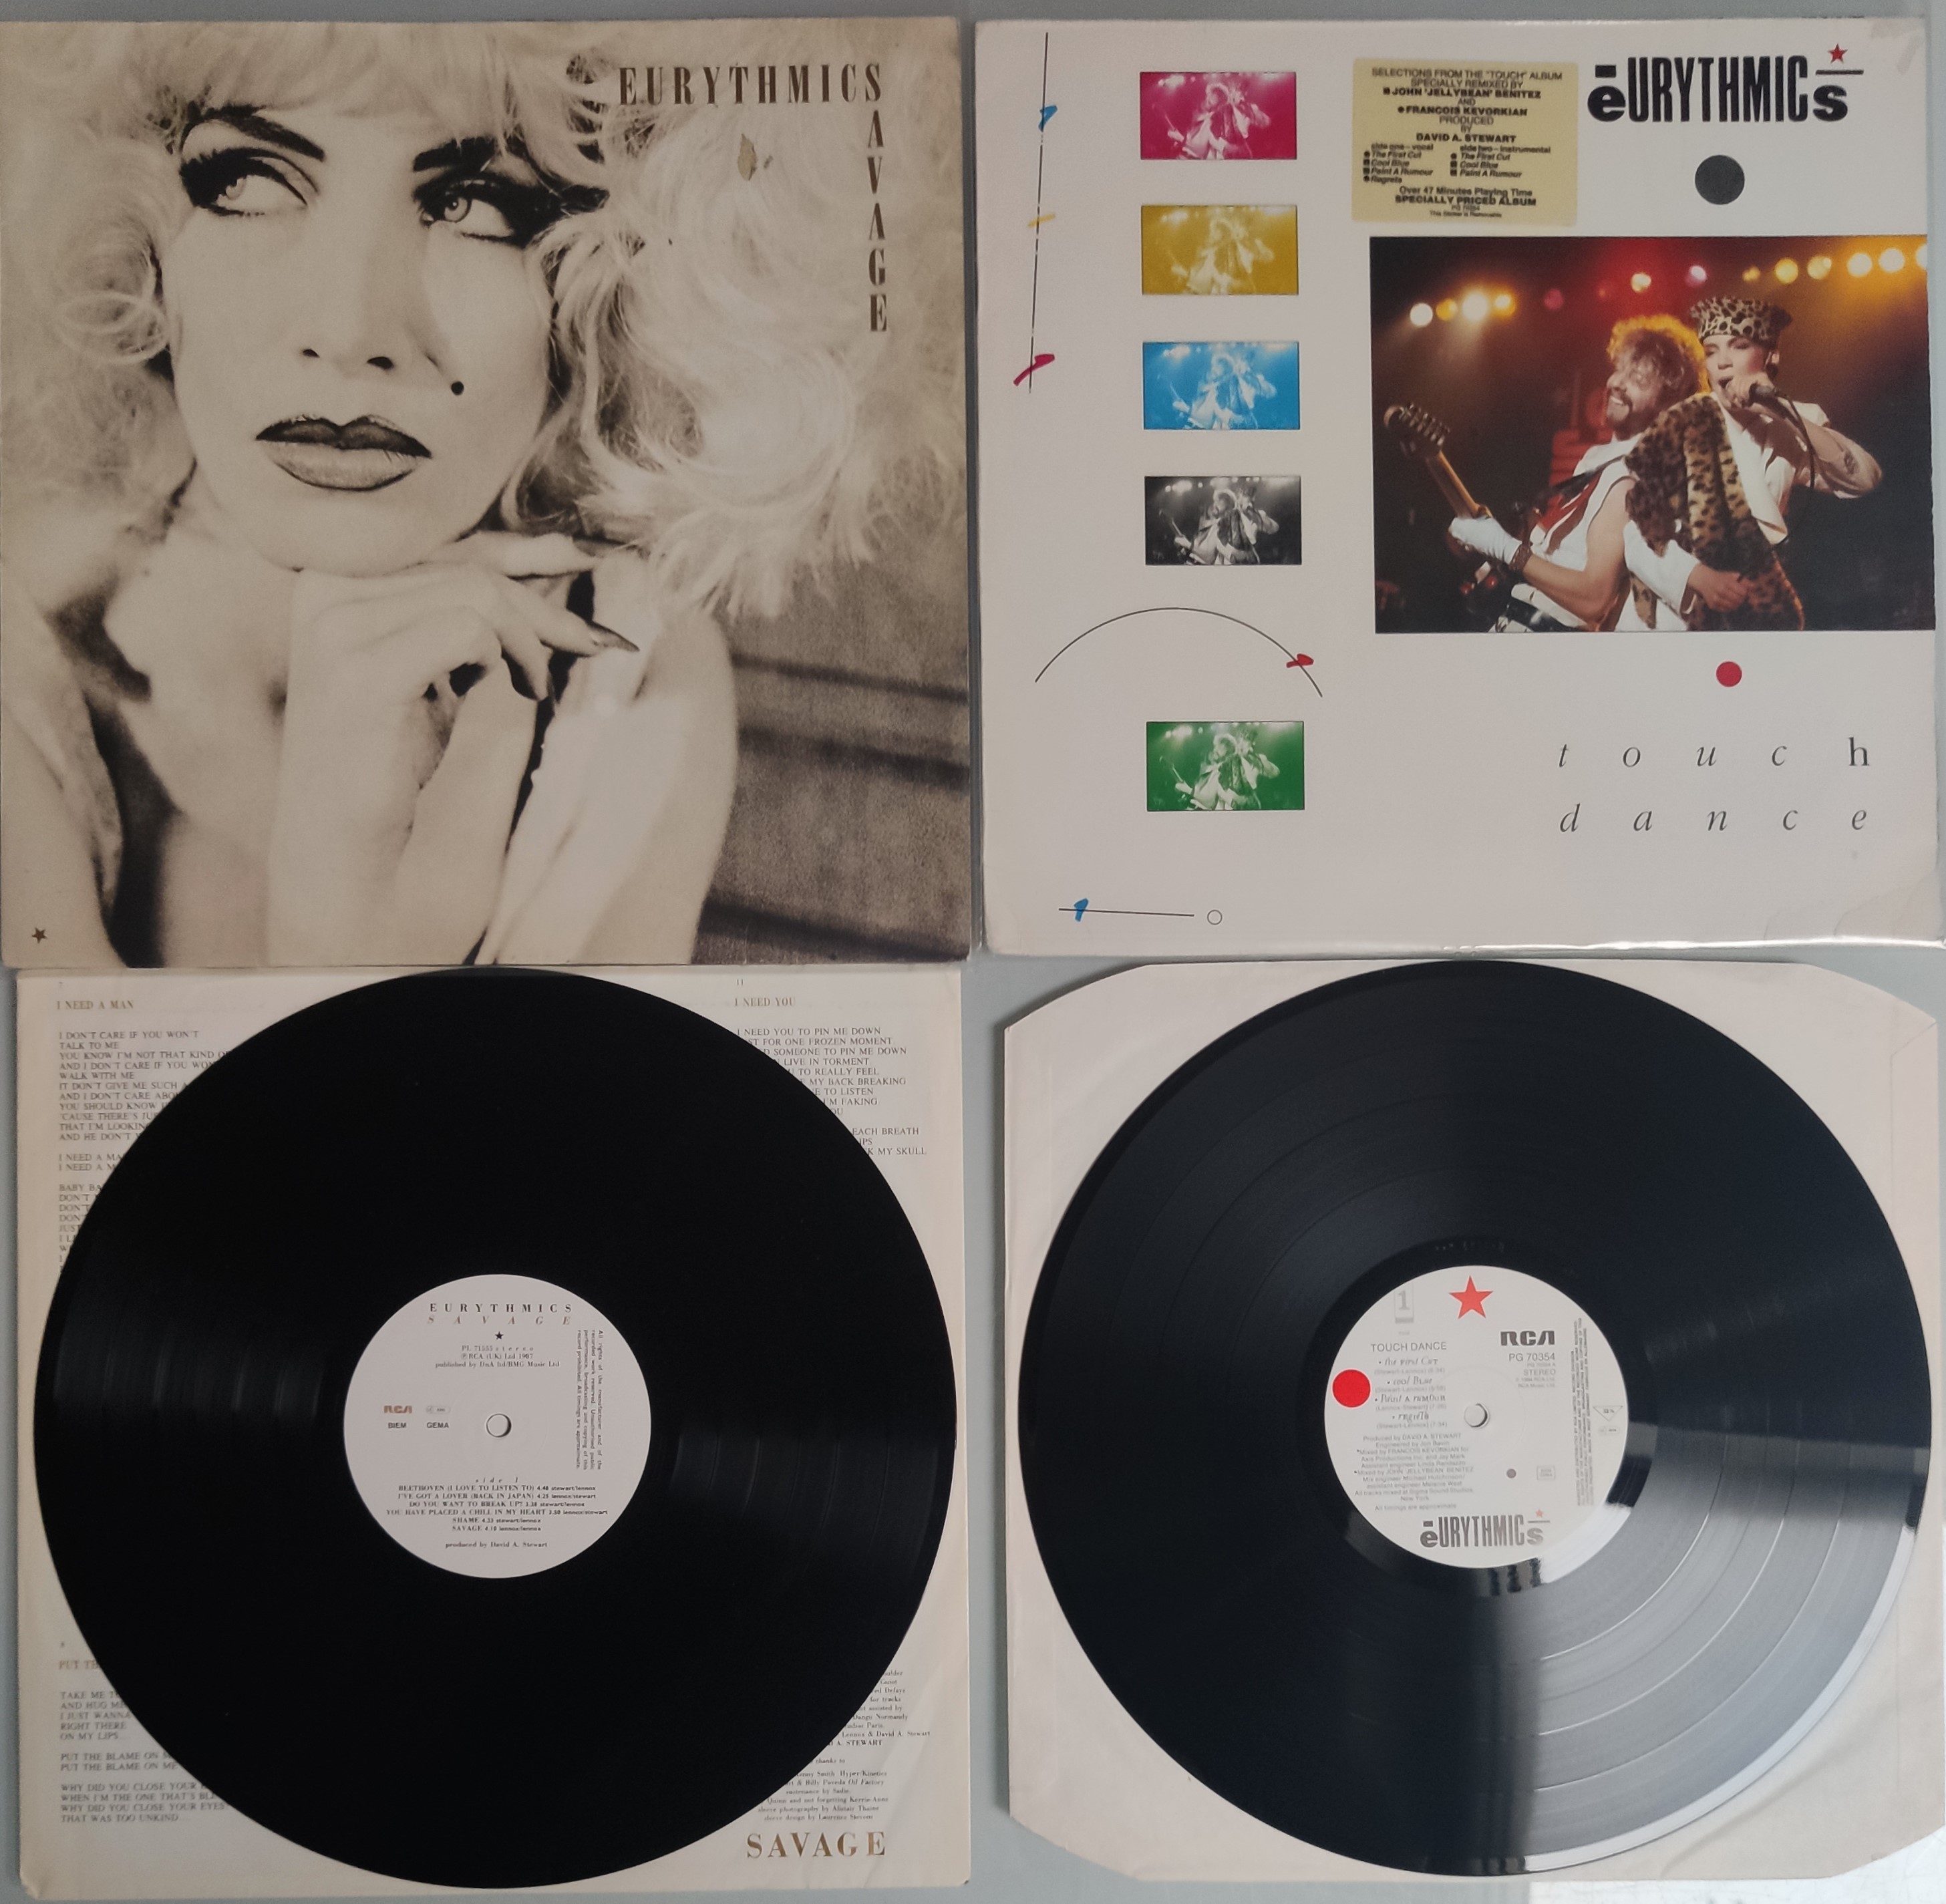 A Collection of 12 x Eurythmics / Annie Lennox New Wave Vinyl LPs and 12” Single. - Image 9 of 9